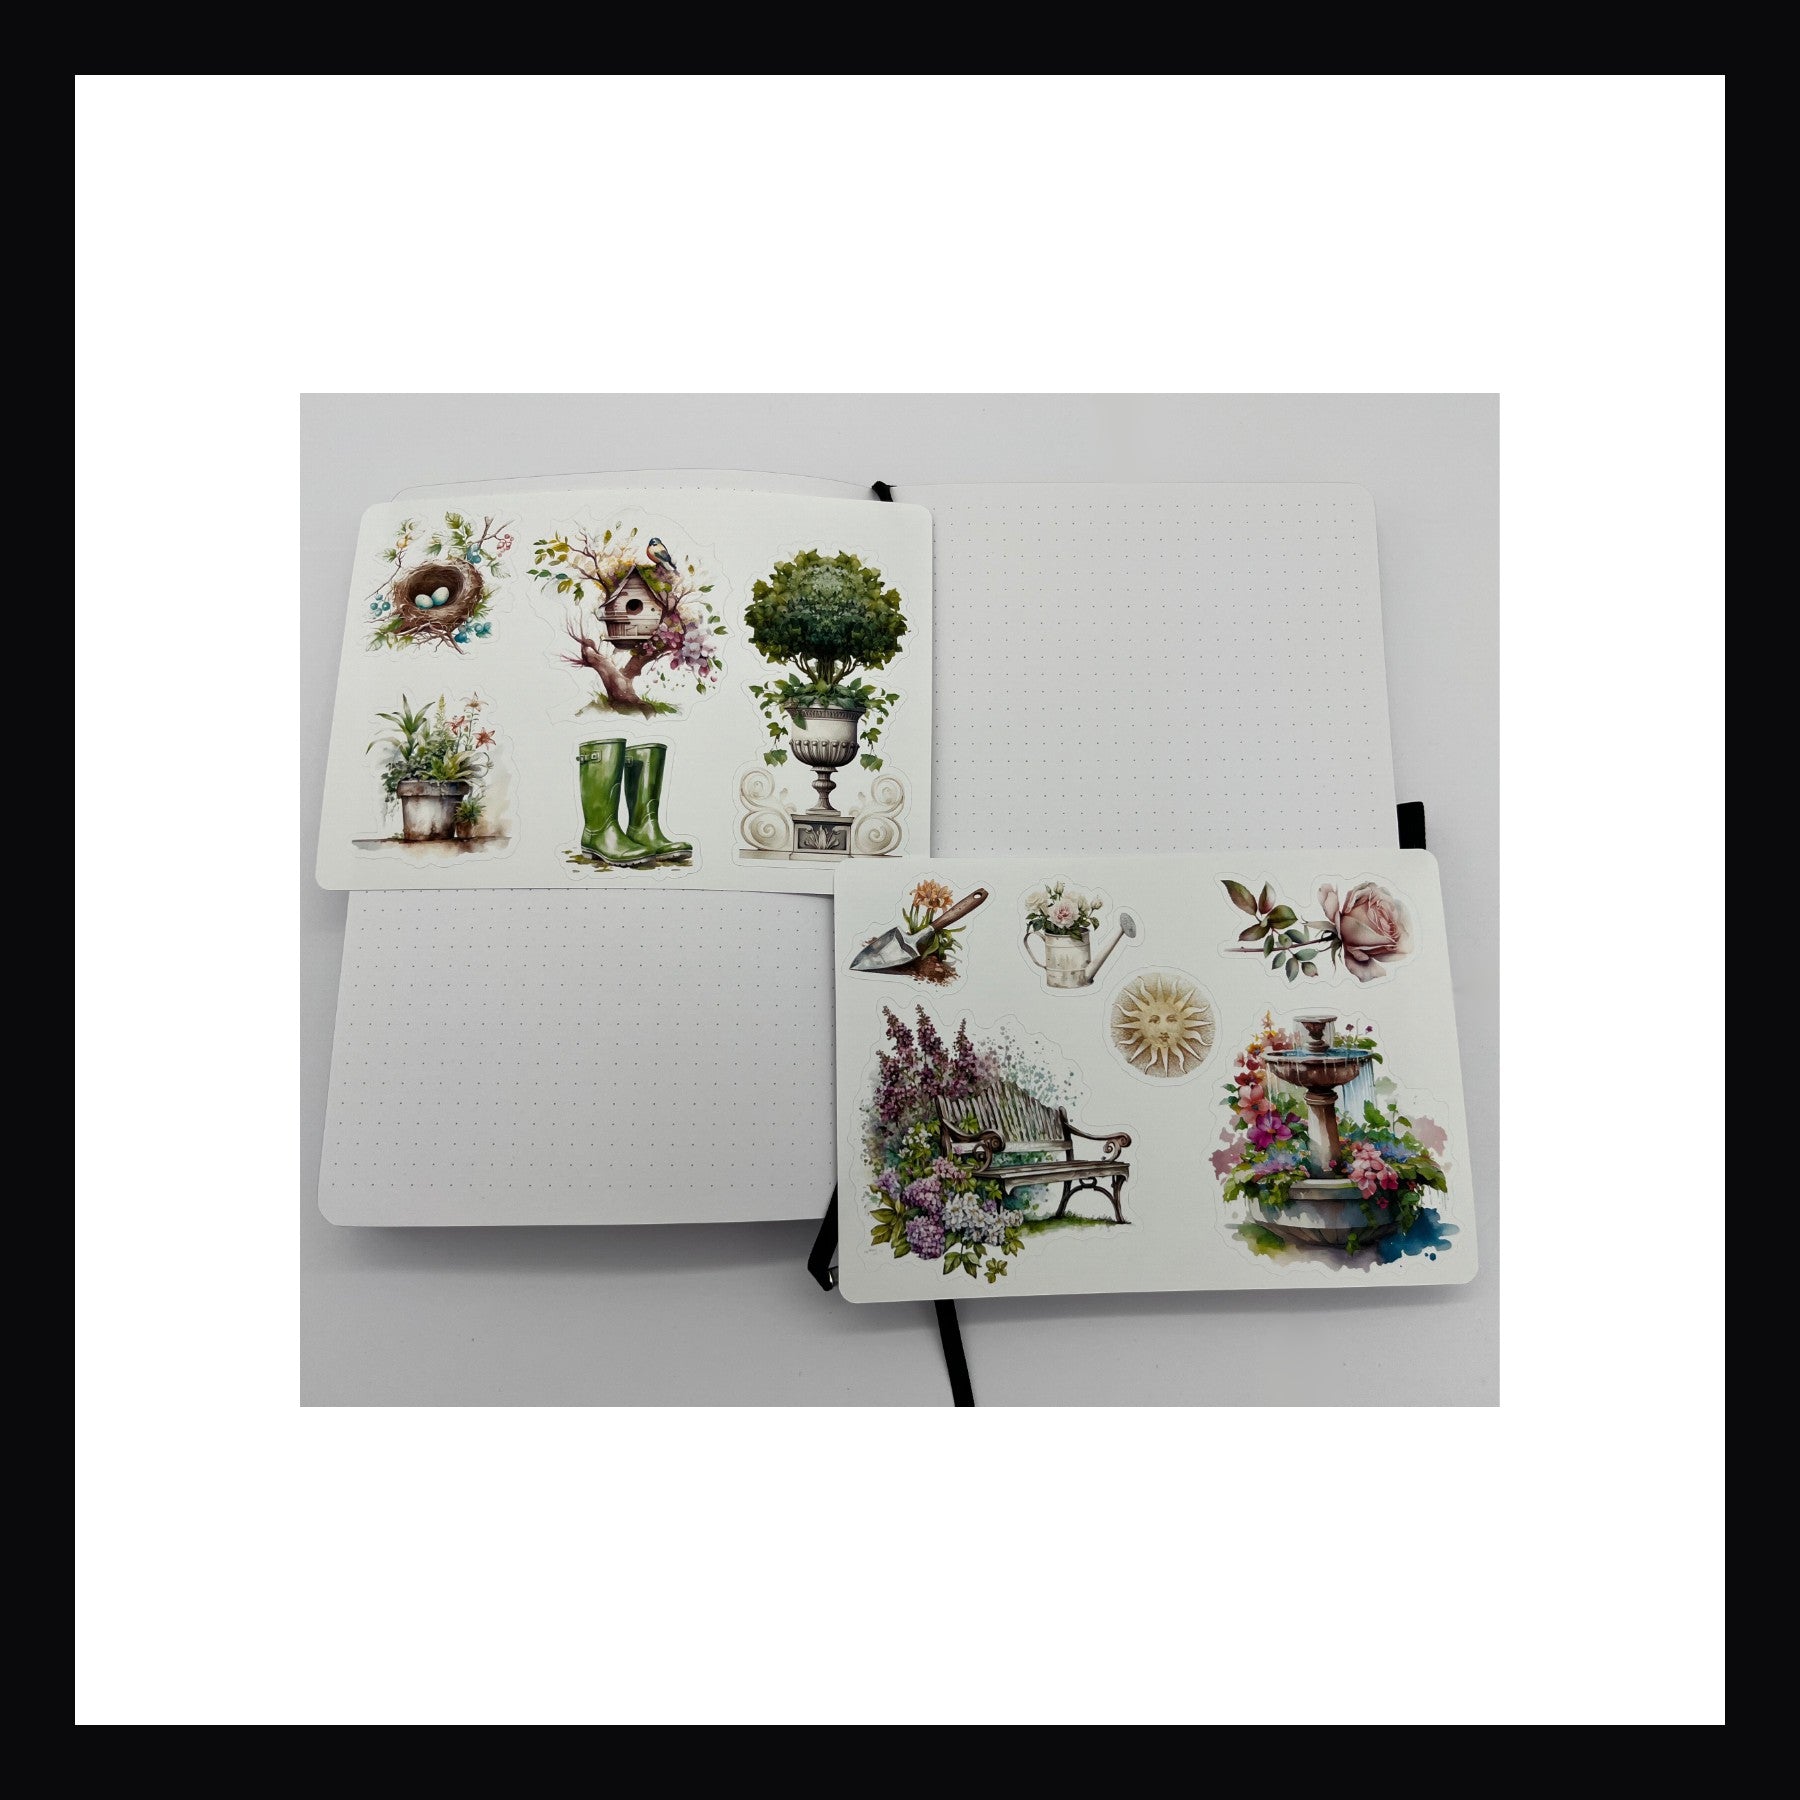 Gardening Junk Journaling Kit contains 2 sticker sheets each measuring 5x7".  Sticker designs include fountains, garden benches, topiary, bird nest, and more.